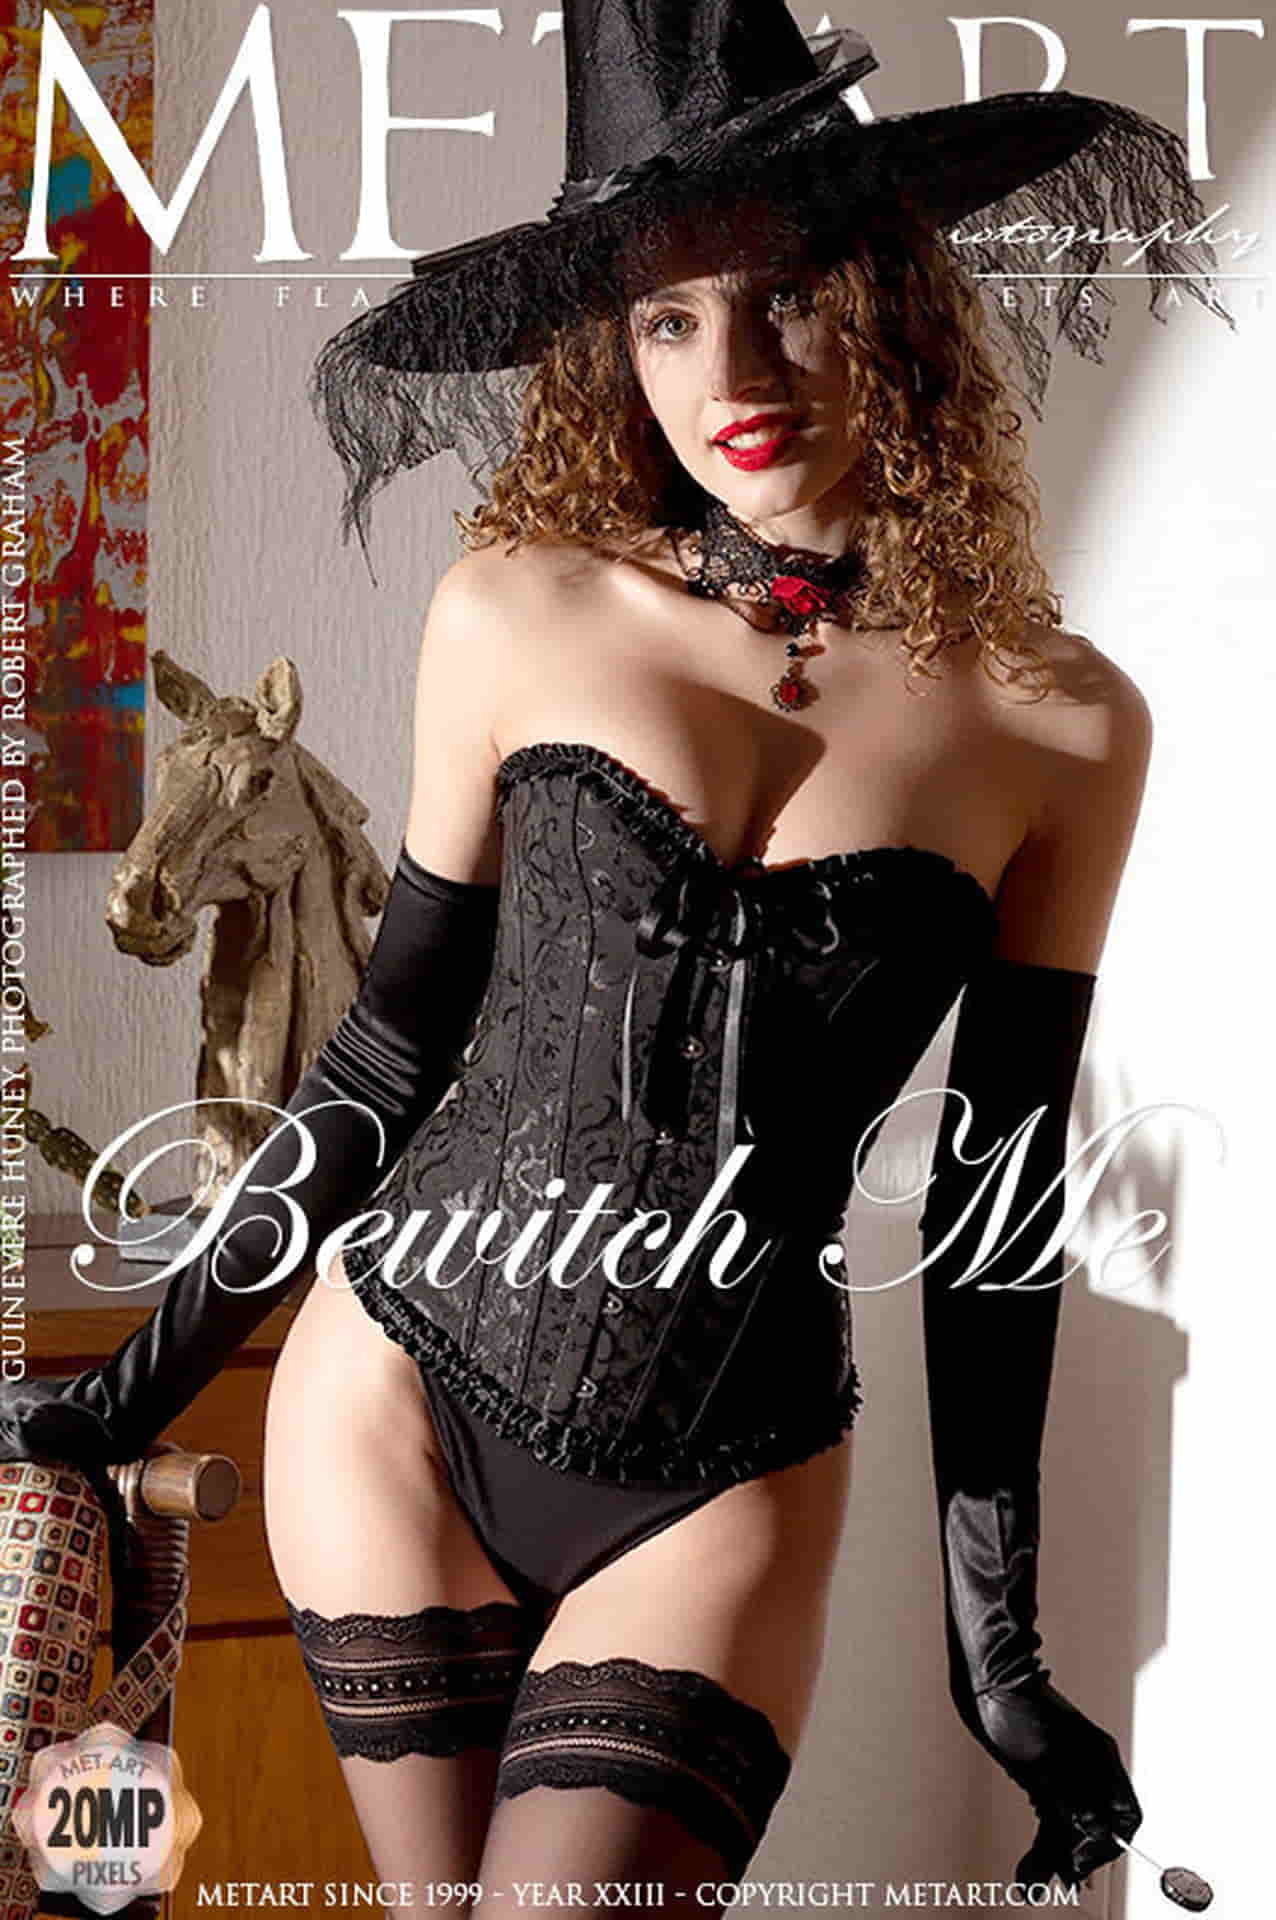 Halloween Special - Guinevere Huney - Bewitch Me